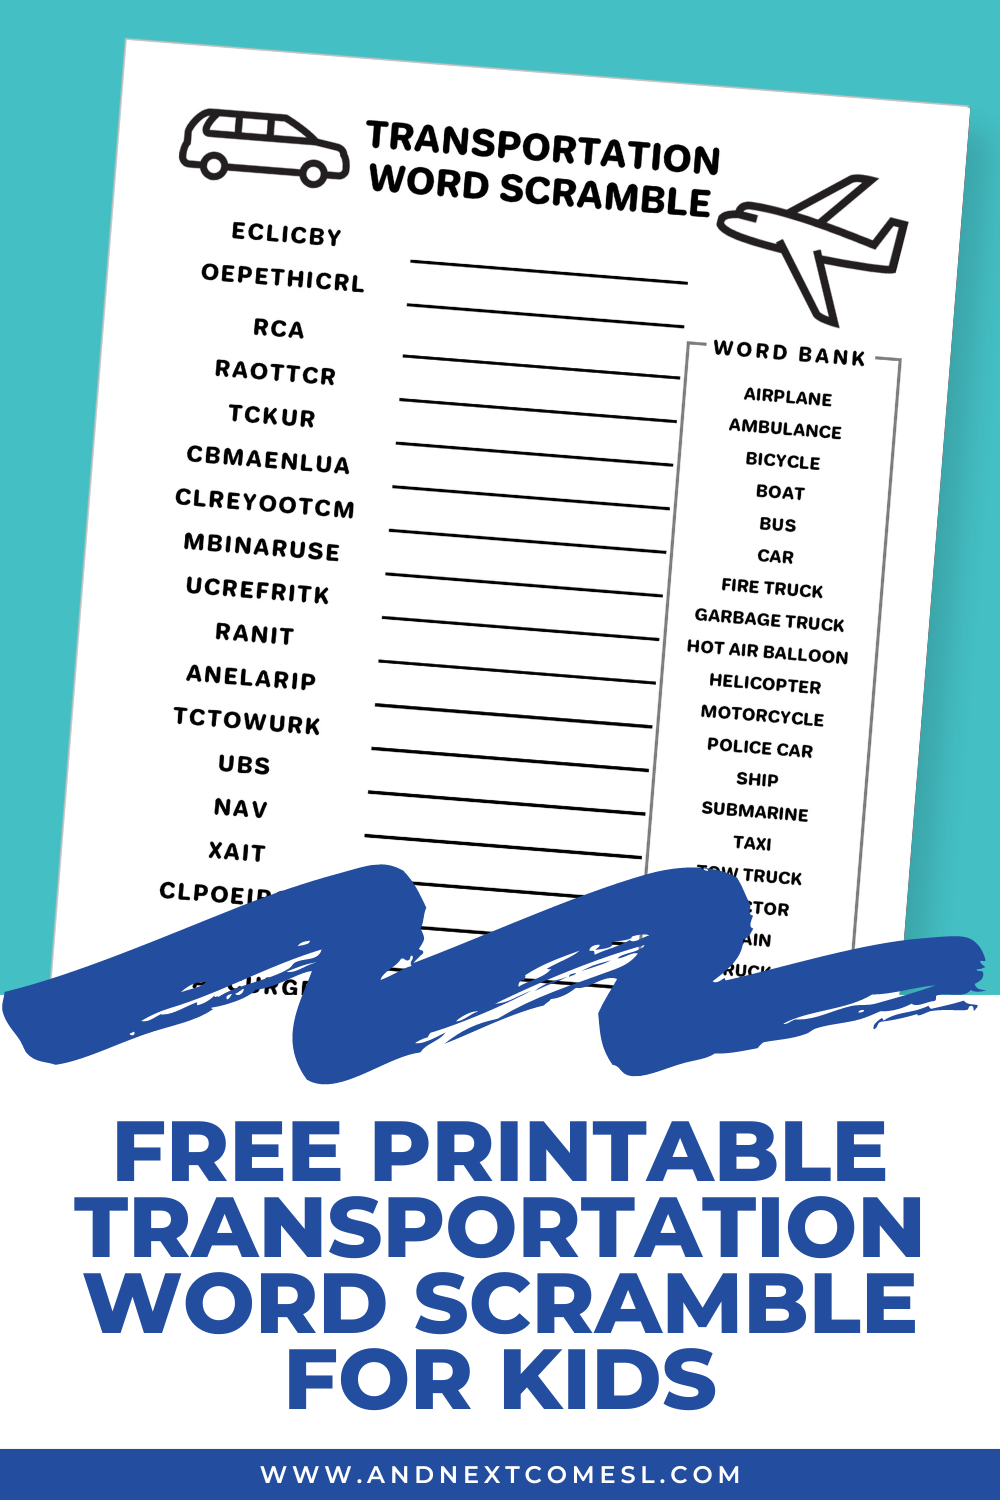 Free printable transportation word scramble game for kids with answers